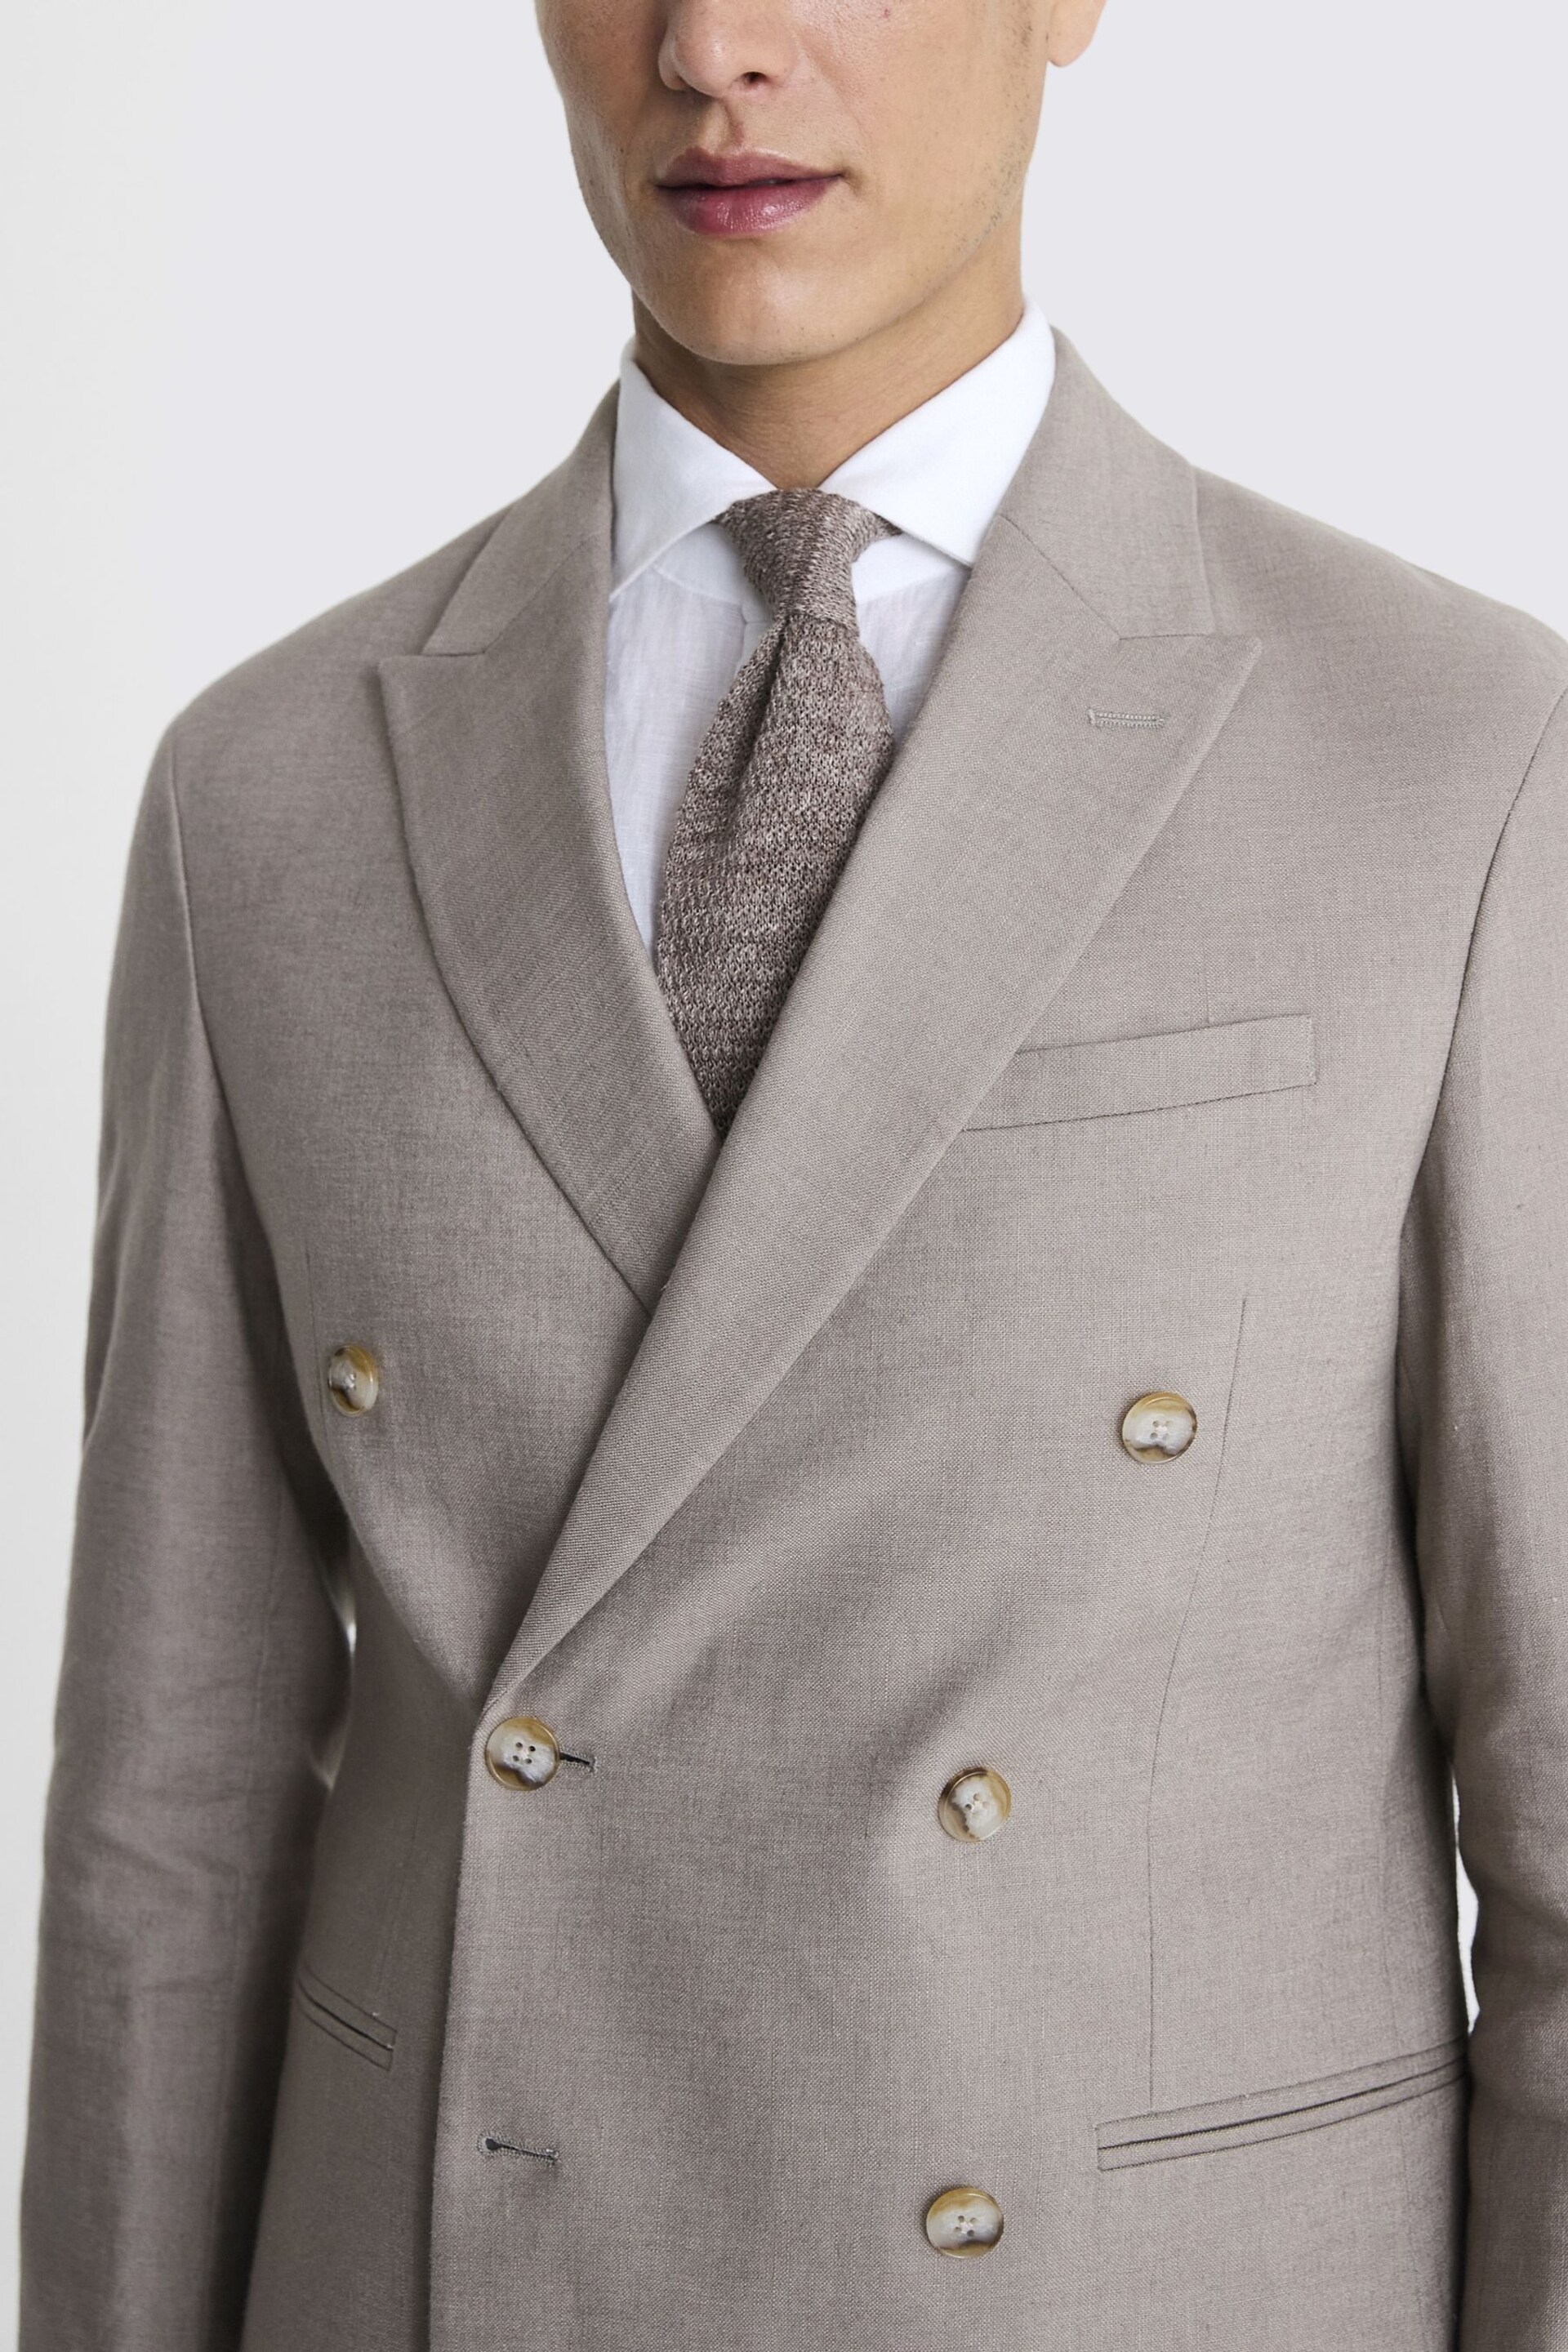 MOSS Slim Fit Taupe Matte Linen Double Breasted Grey Jacket - Image 5 of 5